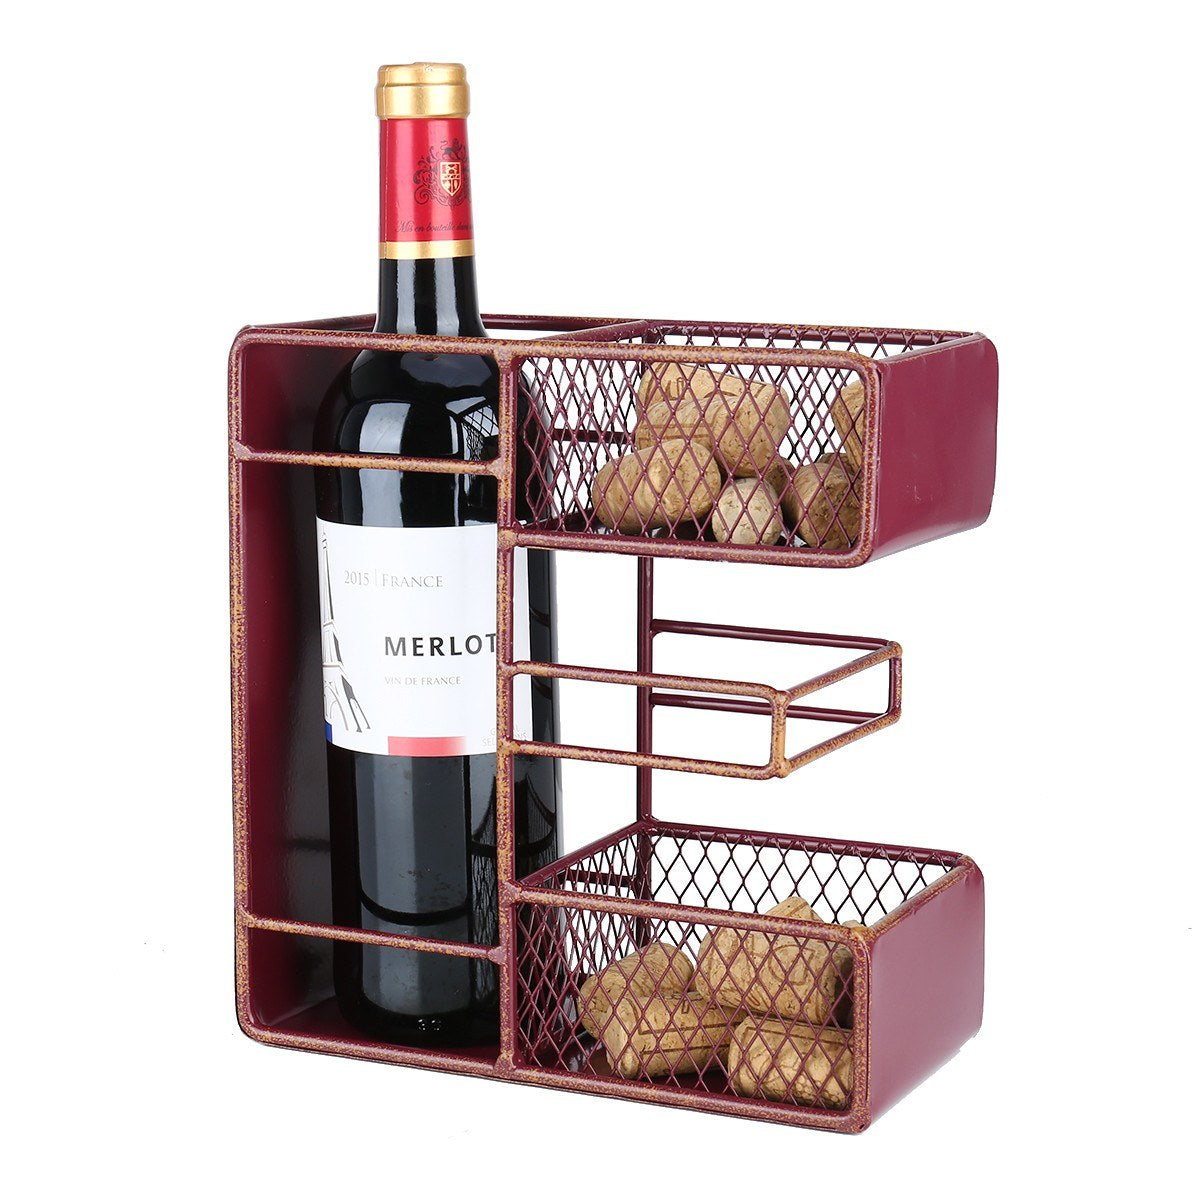 Letter "E" looks great on your table as a wine bottle holder and cork!